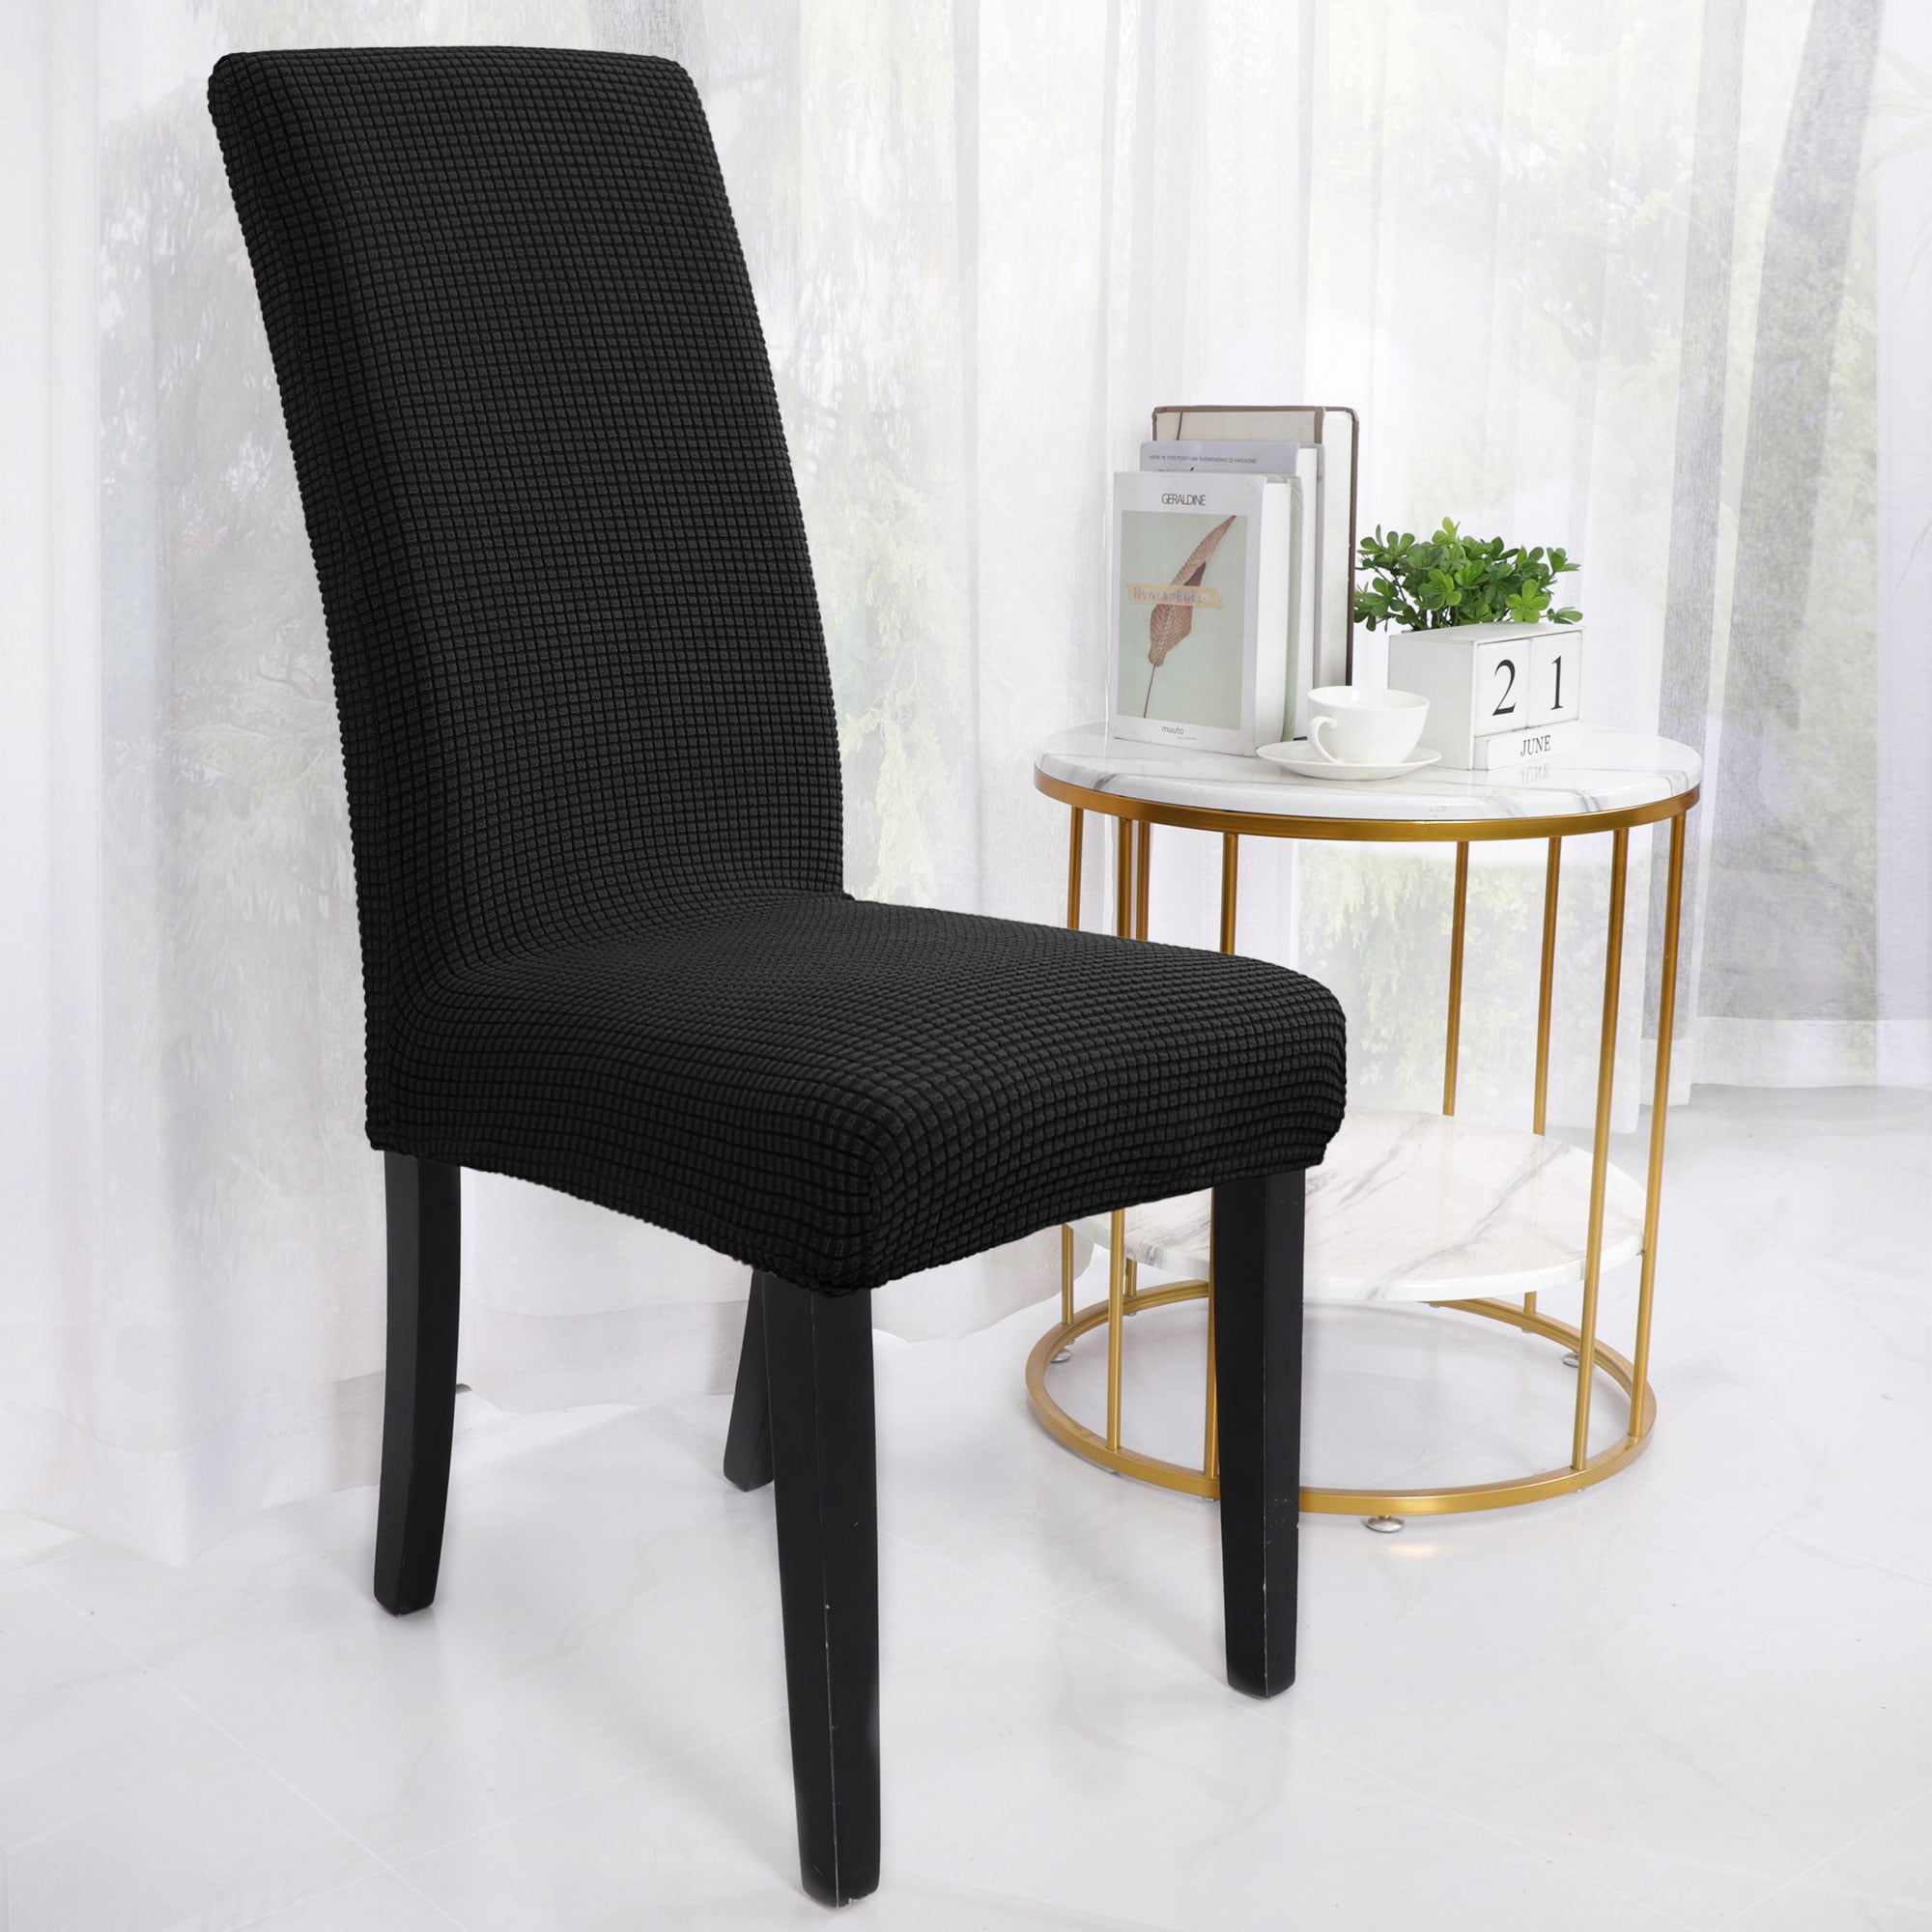 Details about   Spandex Stretch Wedding Banquet Chair Cover Party Deco Dining Room Seat Cover 